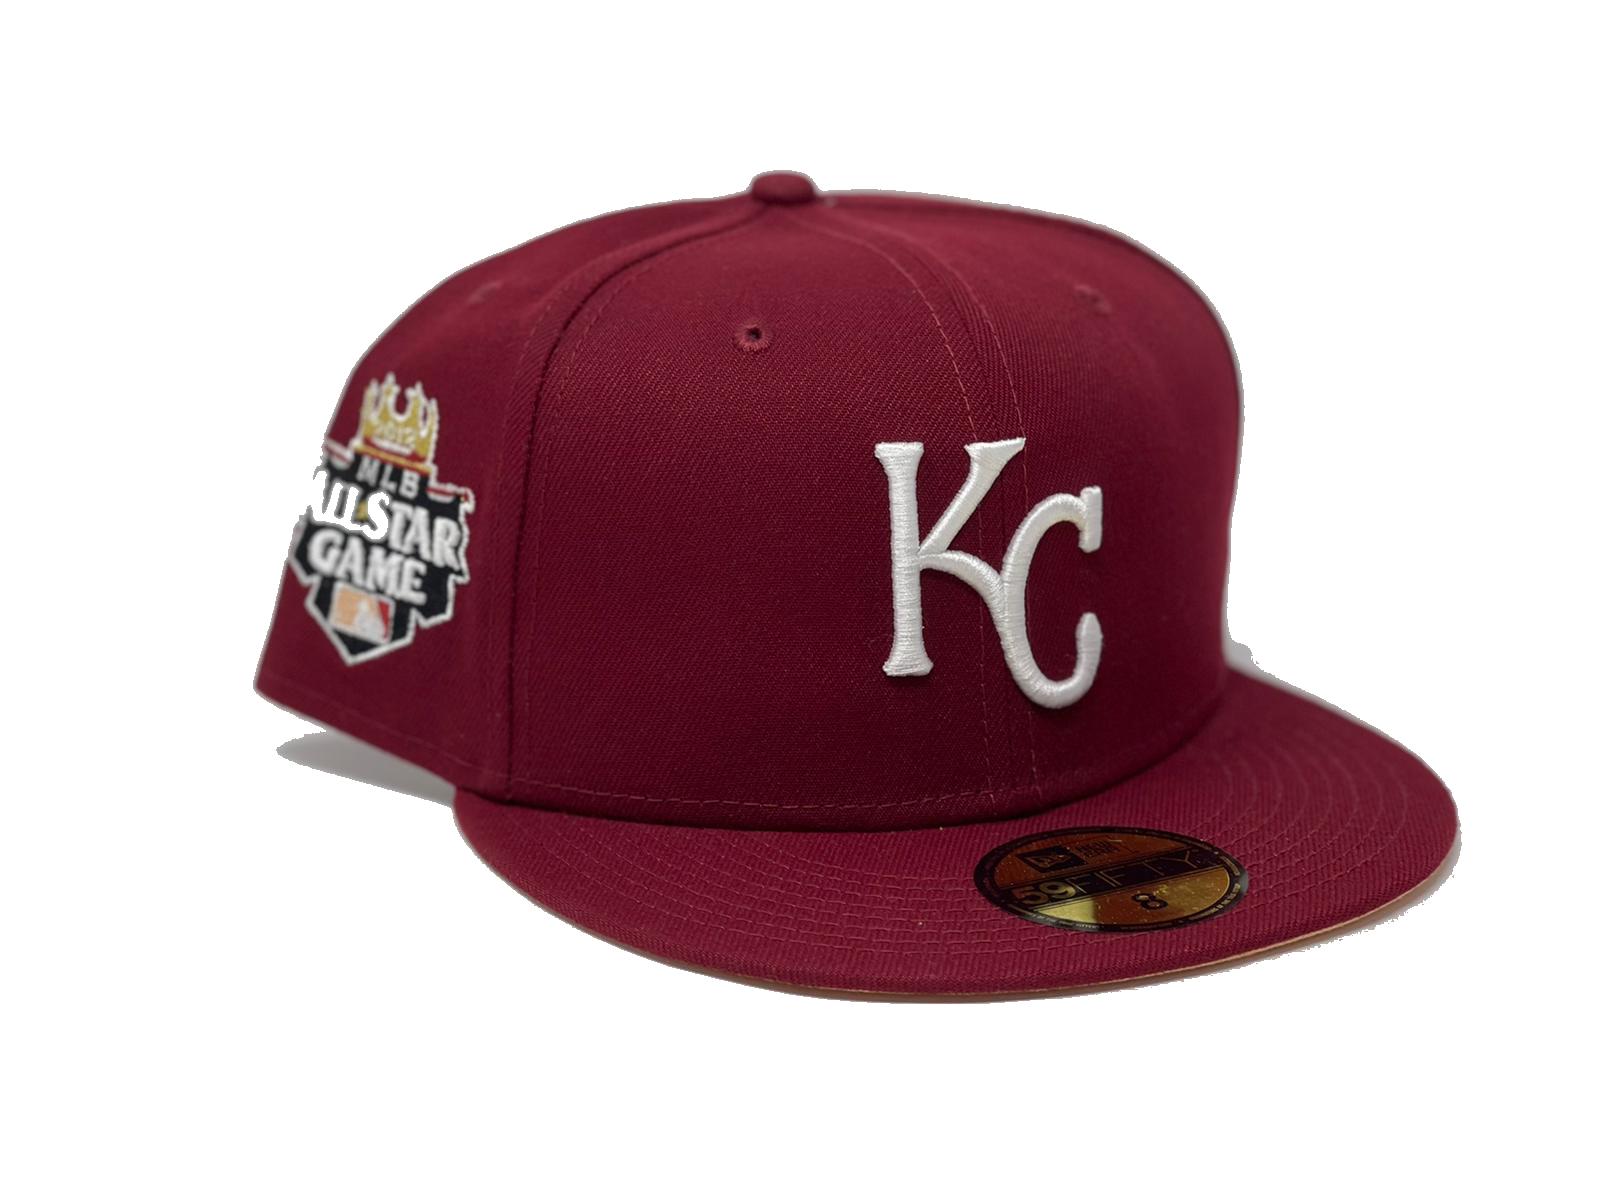 KANSAS CITY ROYALS ALL STAR GAME "MINT CHOCOLATE” Fitted Hat